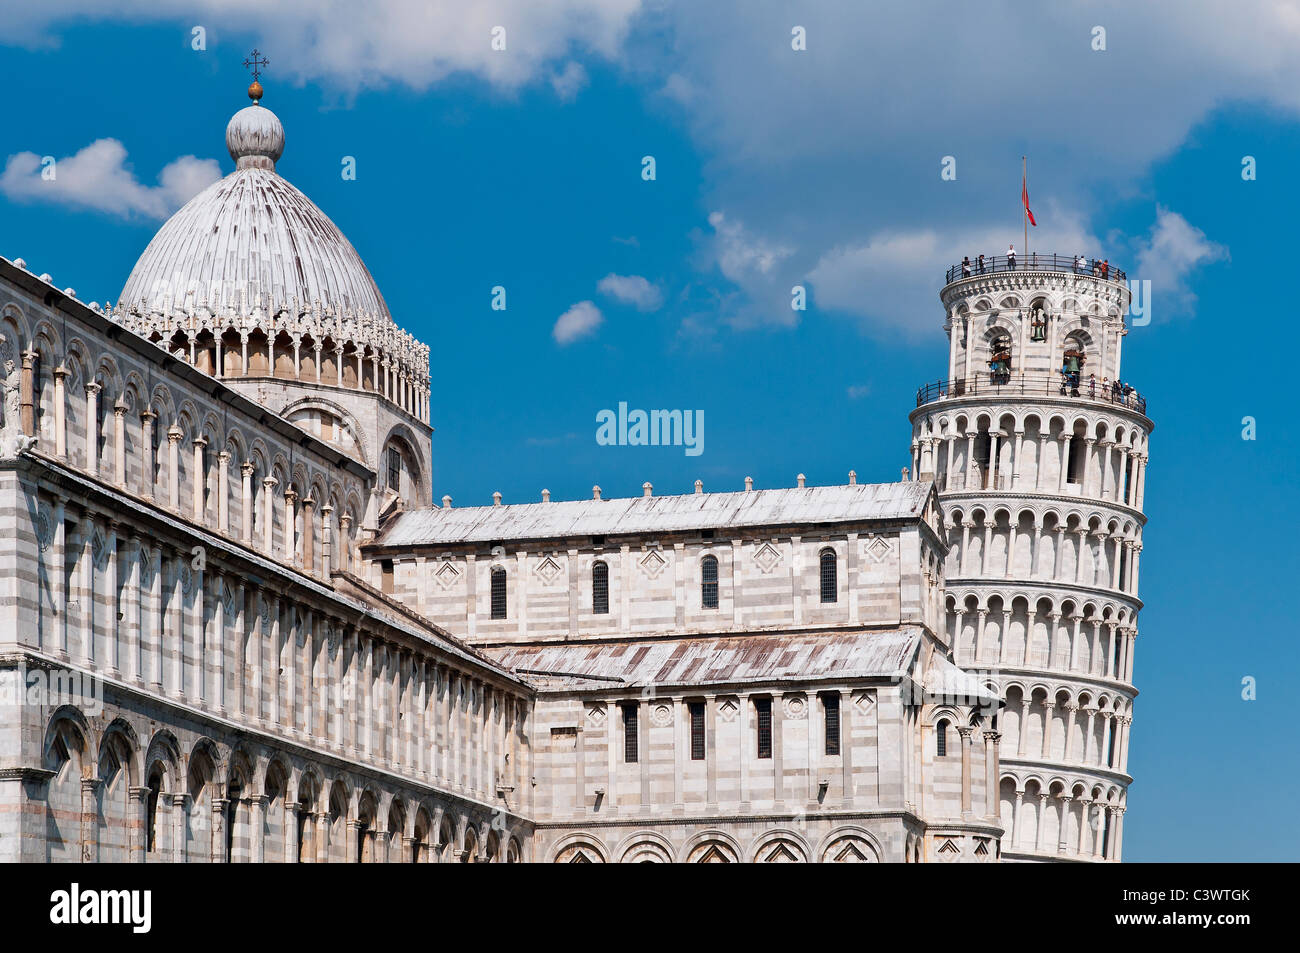 Close-up view over the Cathedral and the Leaning Tower, Piazza del Duomo (Cathedral Square), Pisa, Tuscany, Italy Stock Photo